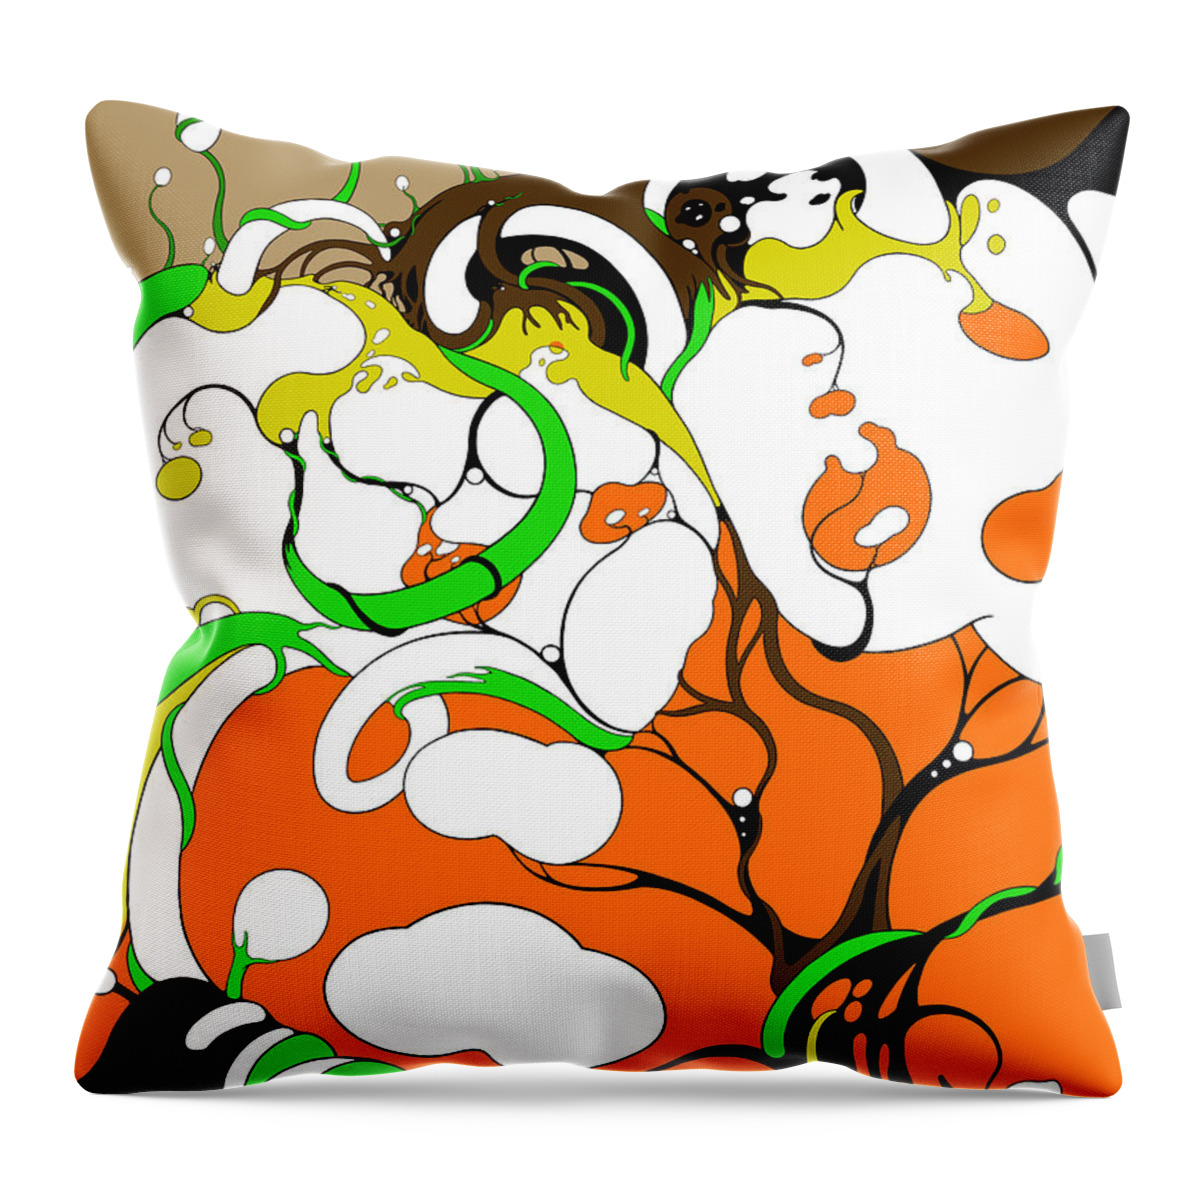 Vines Throw Pillow featuring the digital art Pandemic by Craig Tilley